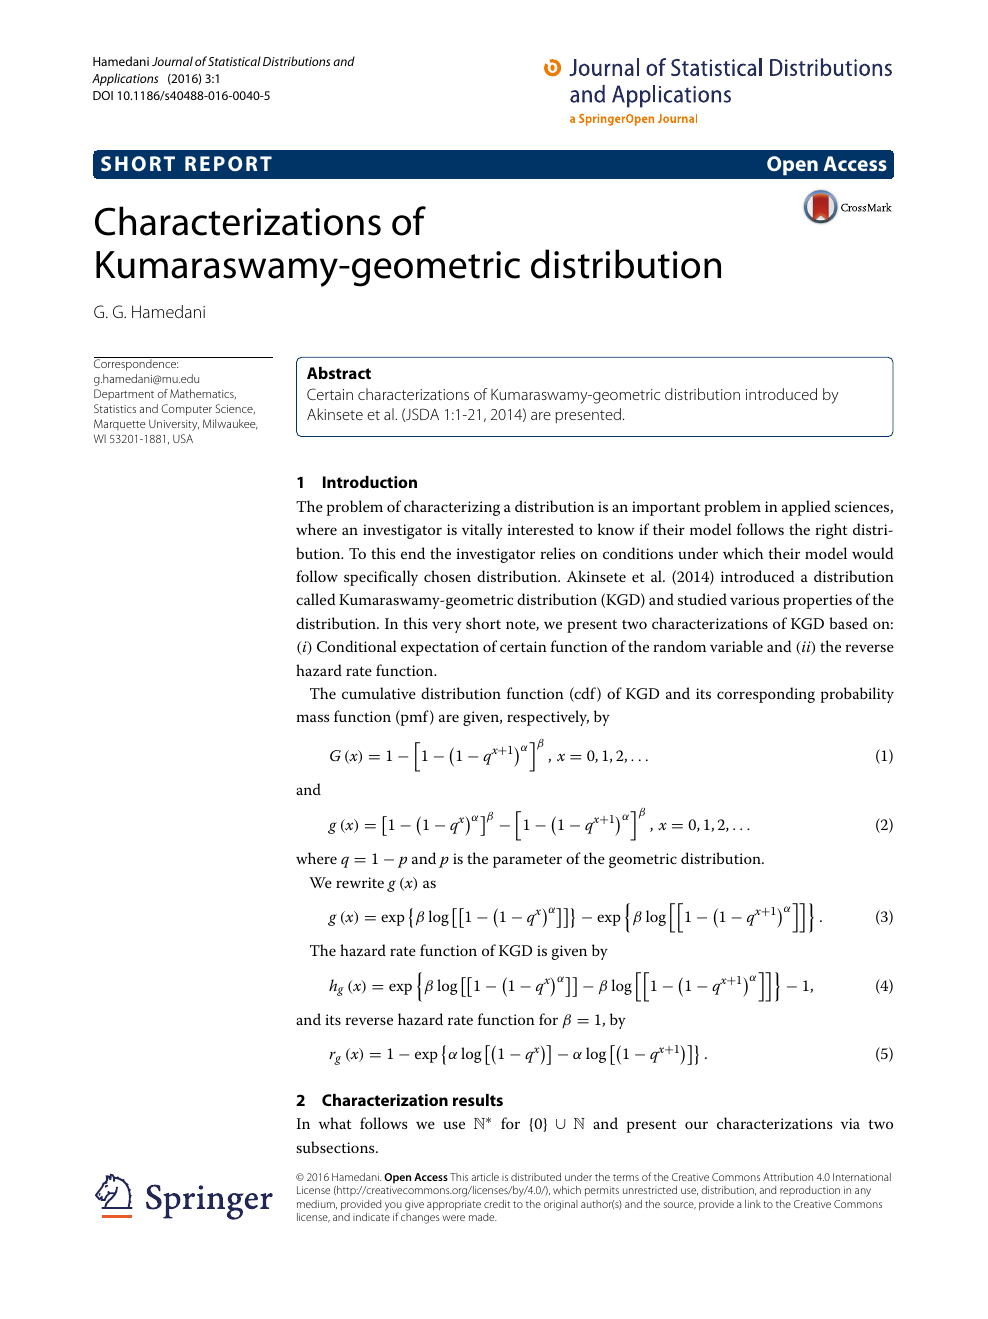 Characterizations Of Kumaraswamy Geometric Distribution Topic Of Research Paper In Mathematics Download Scholarly Article Pdf And Read For Free On Cyberleninka Open Science Hub